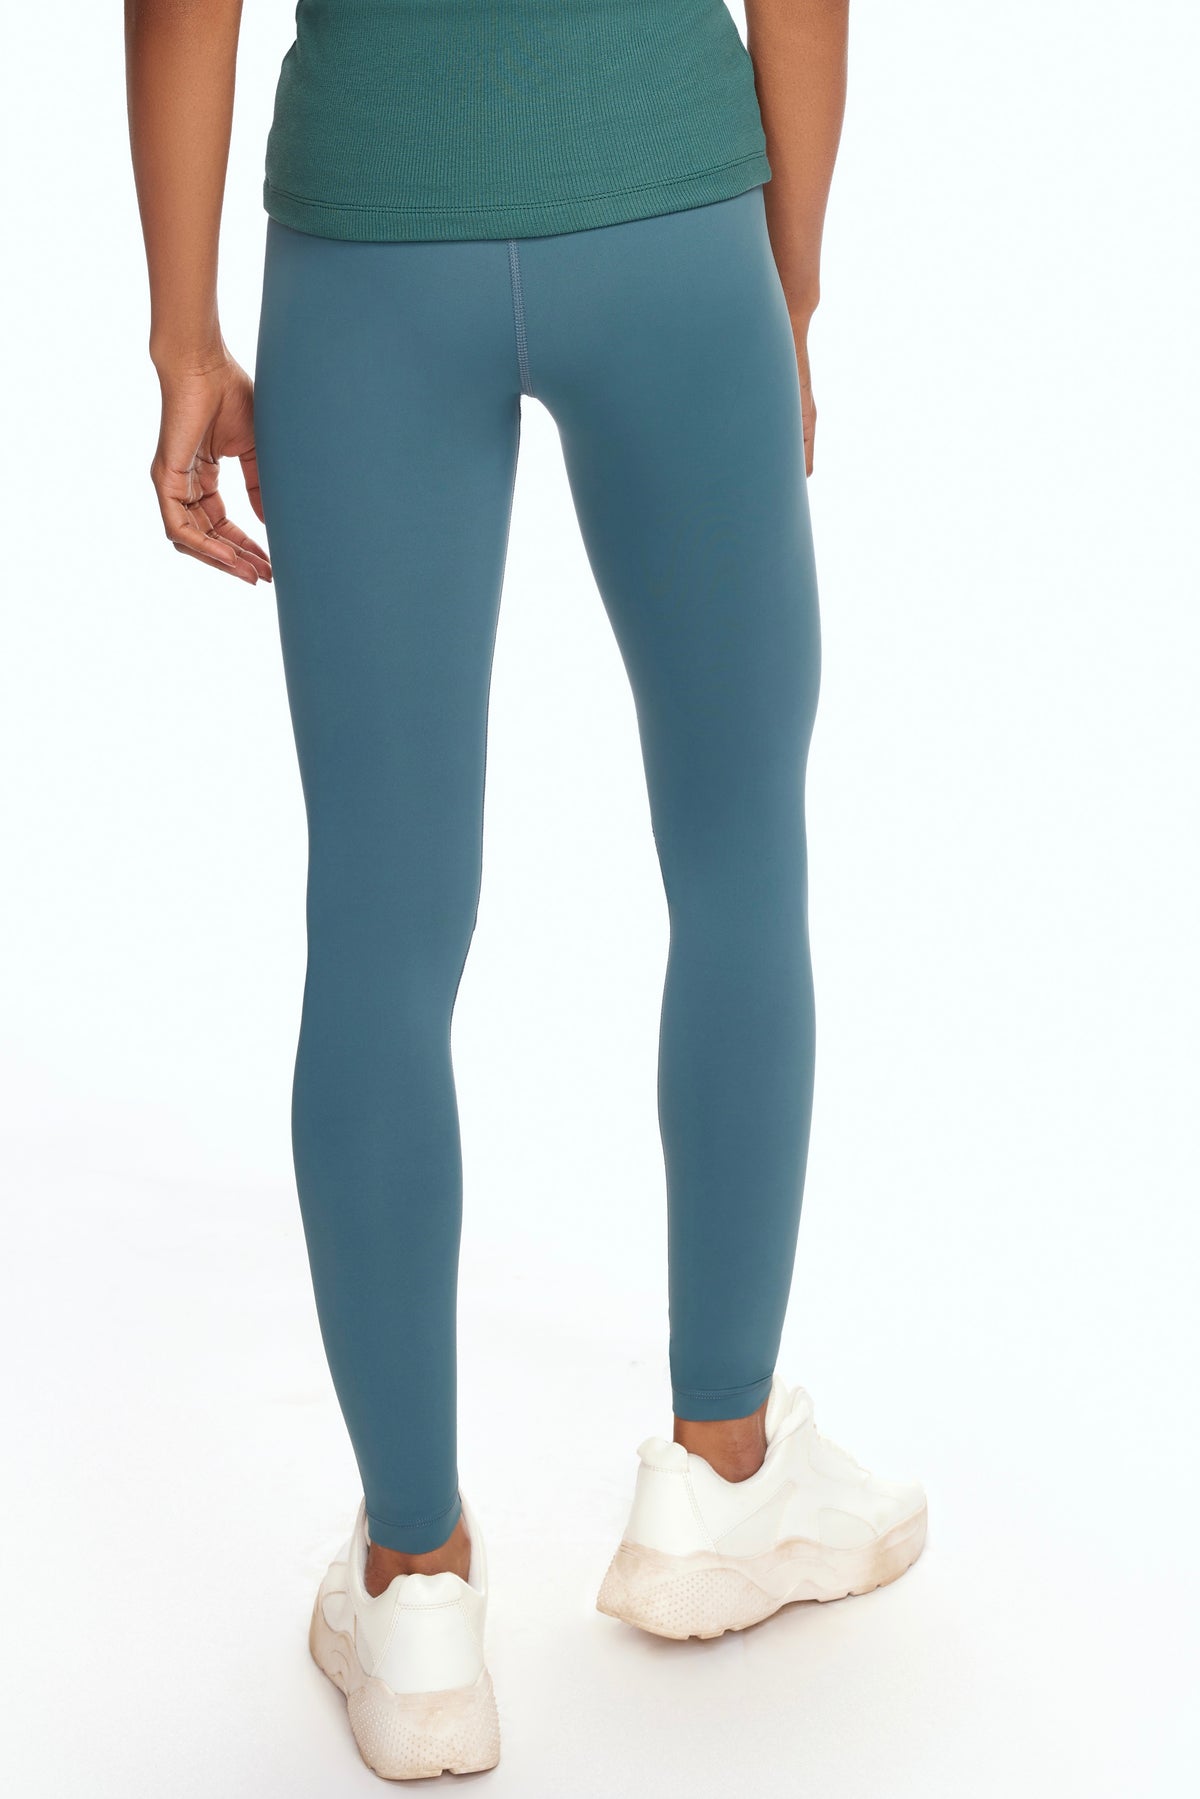 Sky Seamless Leggings – Pace Active